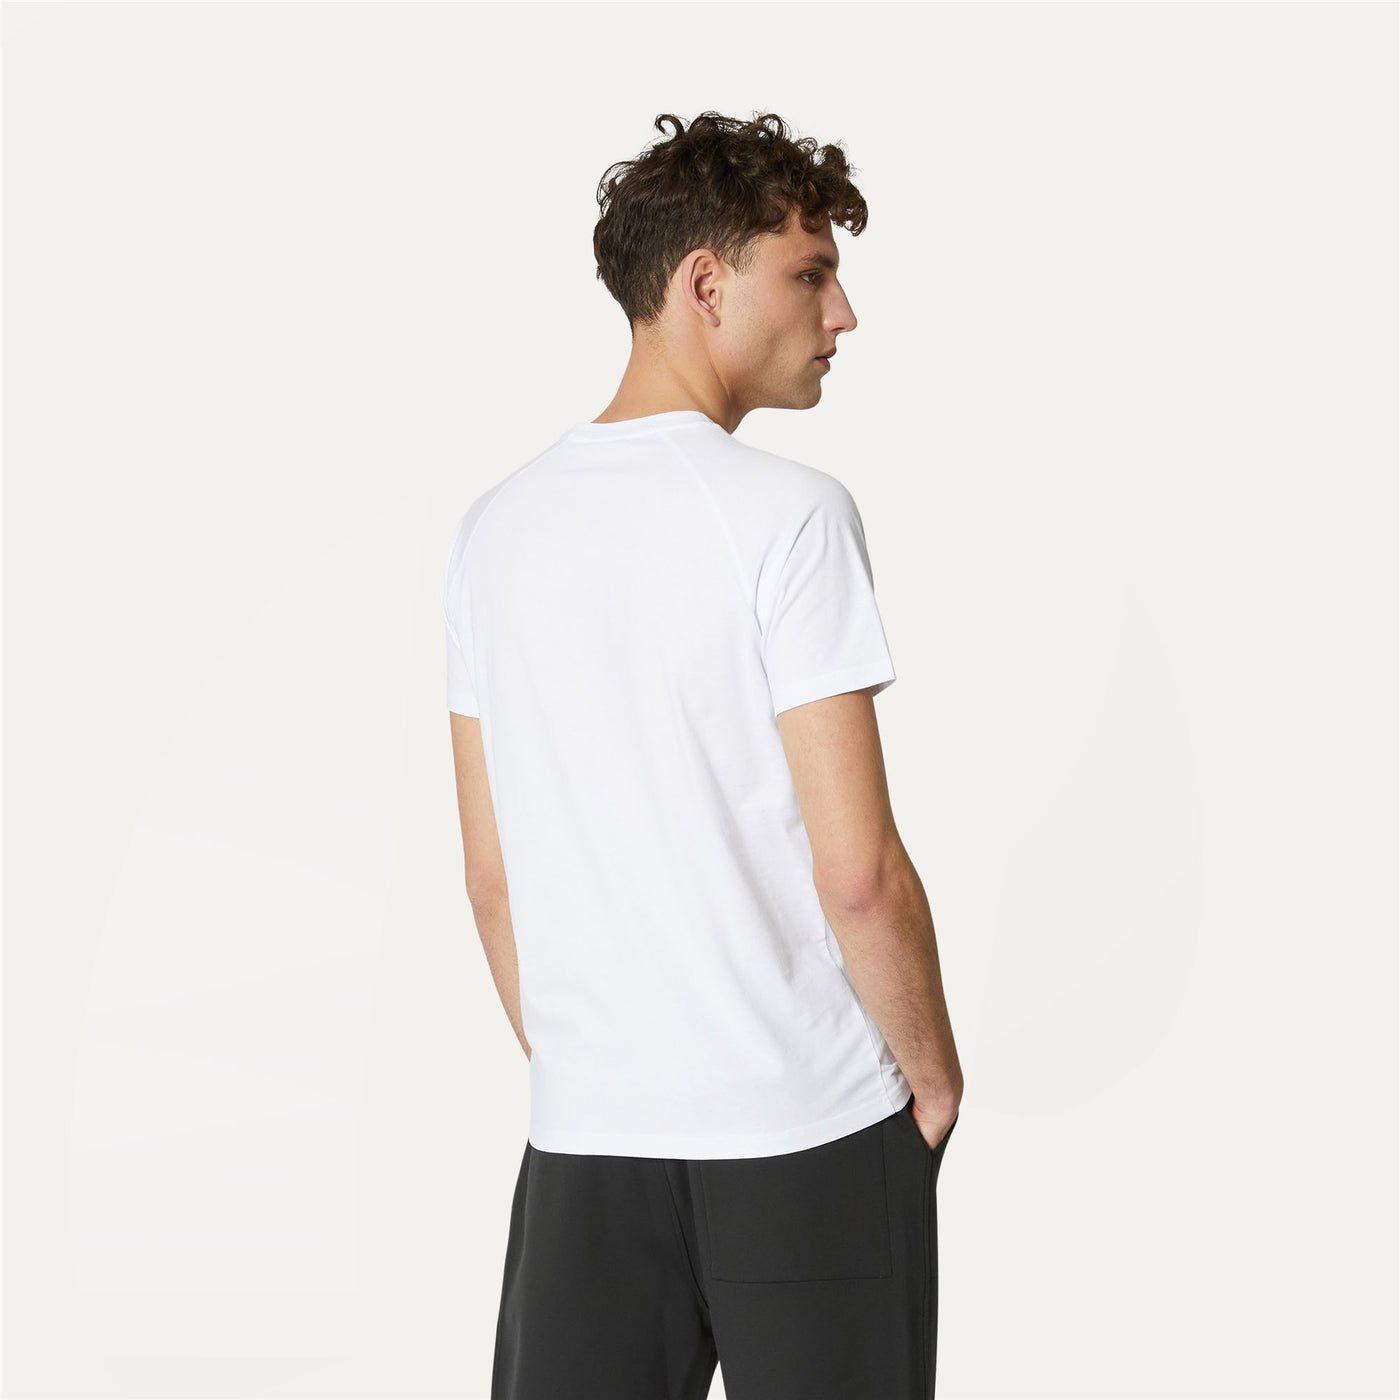 T-ShirtsTop Man EDWING T-Shirt WHITE Dressed Front Double		